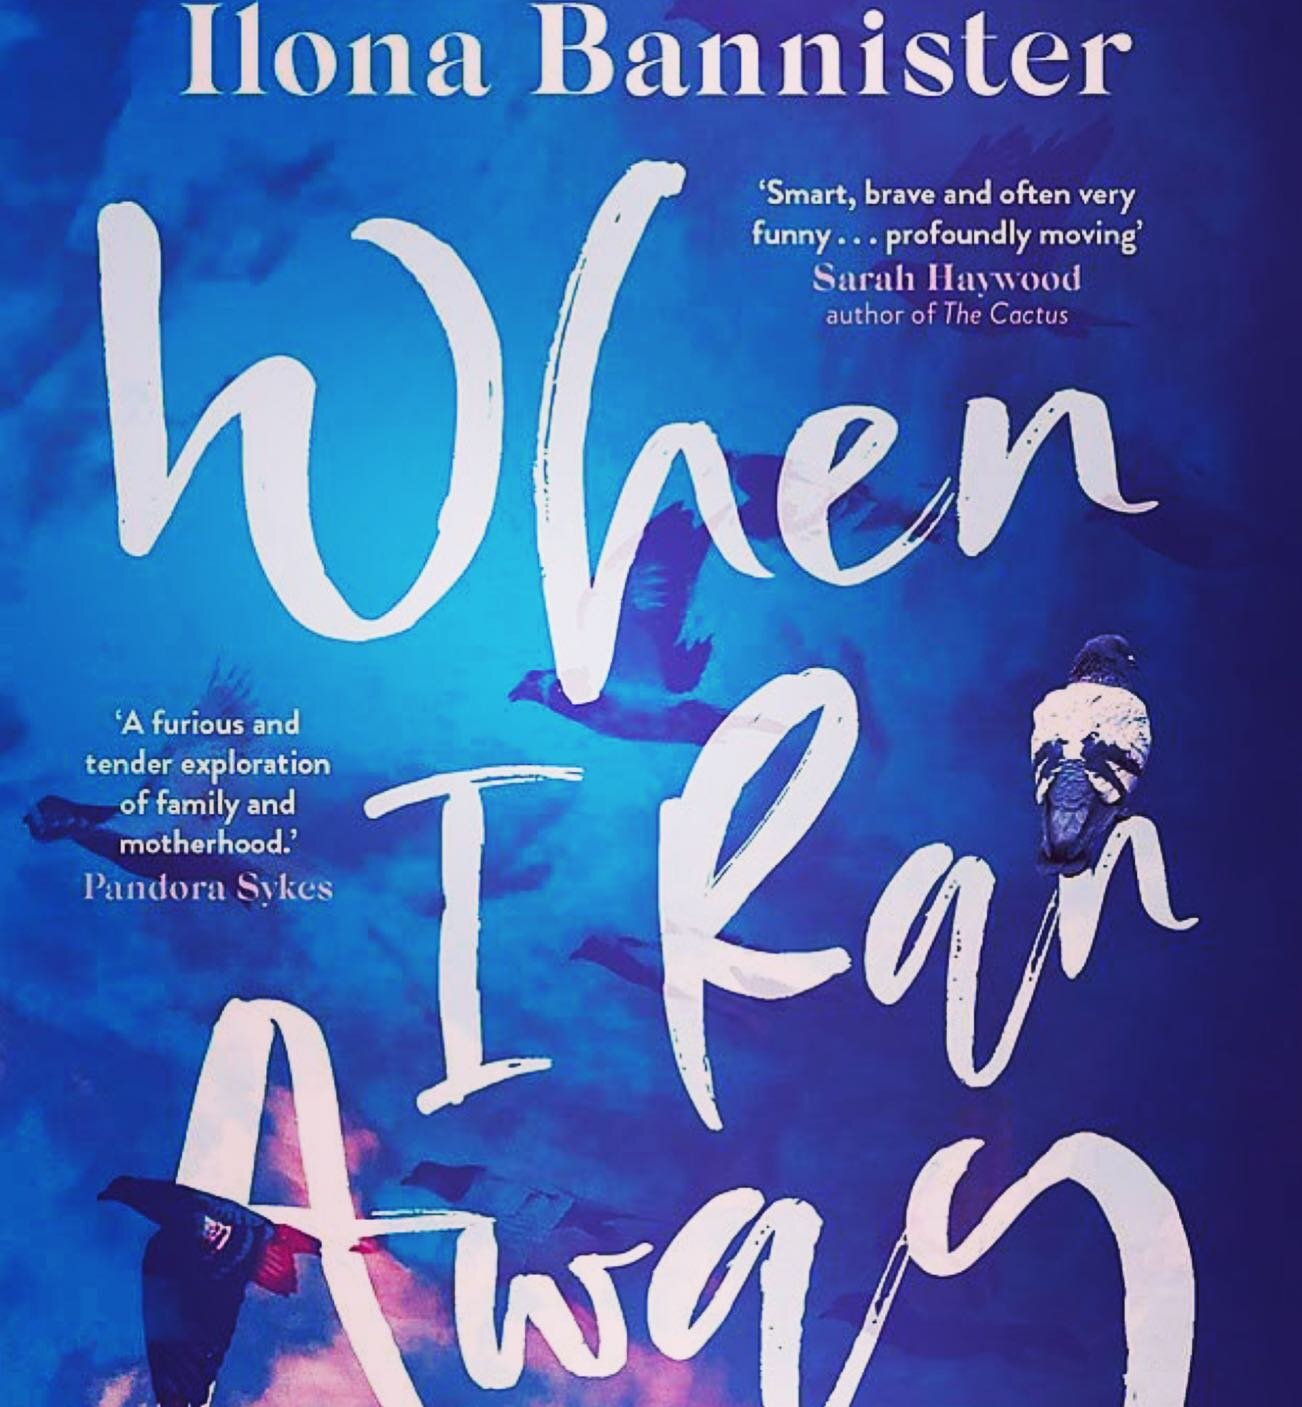 Happy UK publication day to @ilona.bannister! I was lucky enough to read When I Ran Away in proof, and loved it. It&rsquo;s a profoundly moving story, set in London and New York, that shows the redemptive power of love and acceptance - of friends, fa